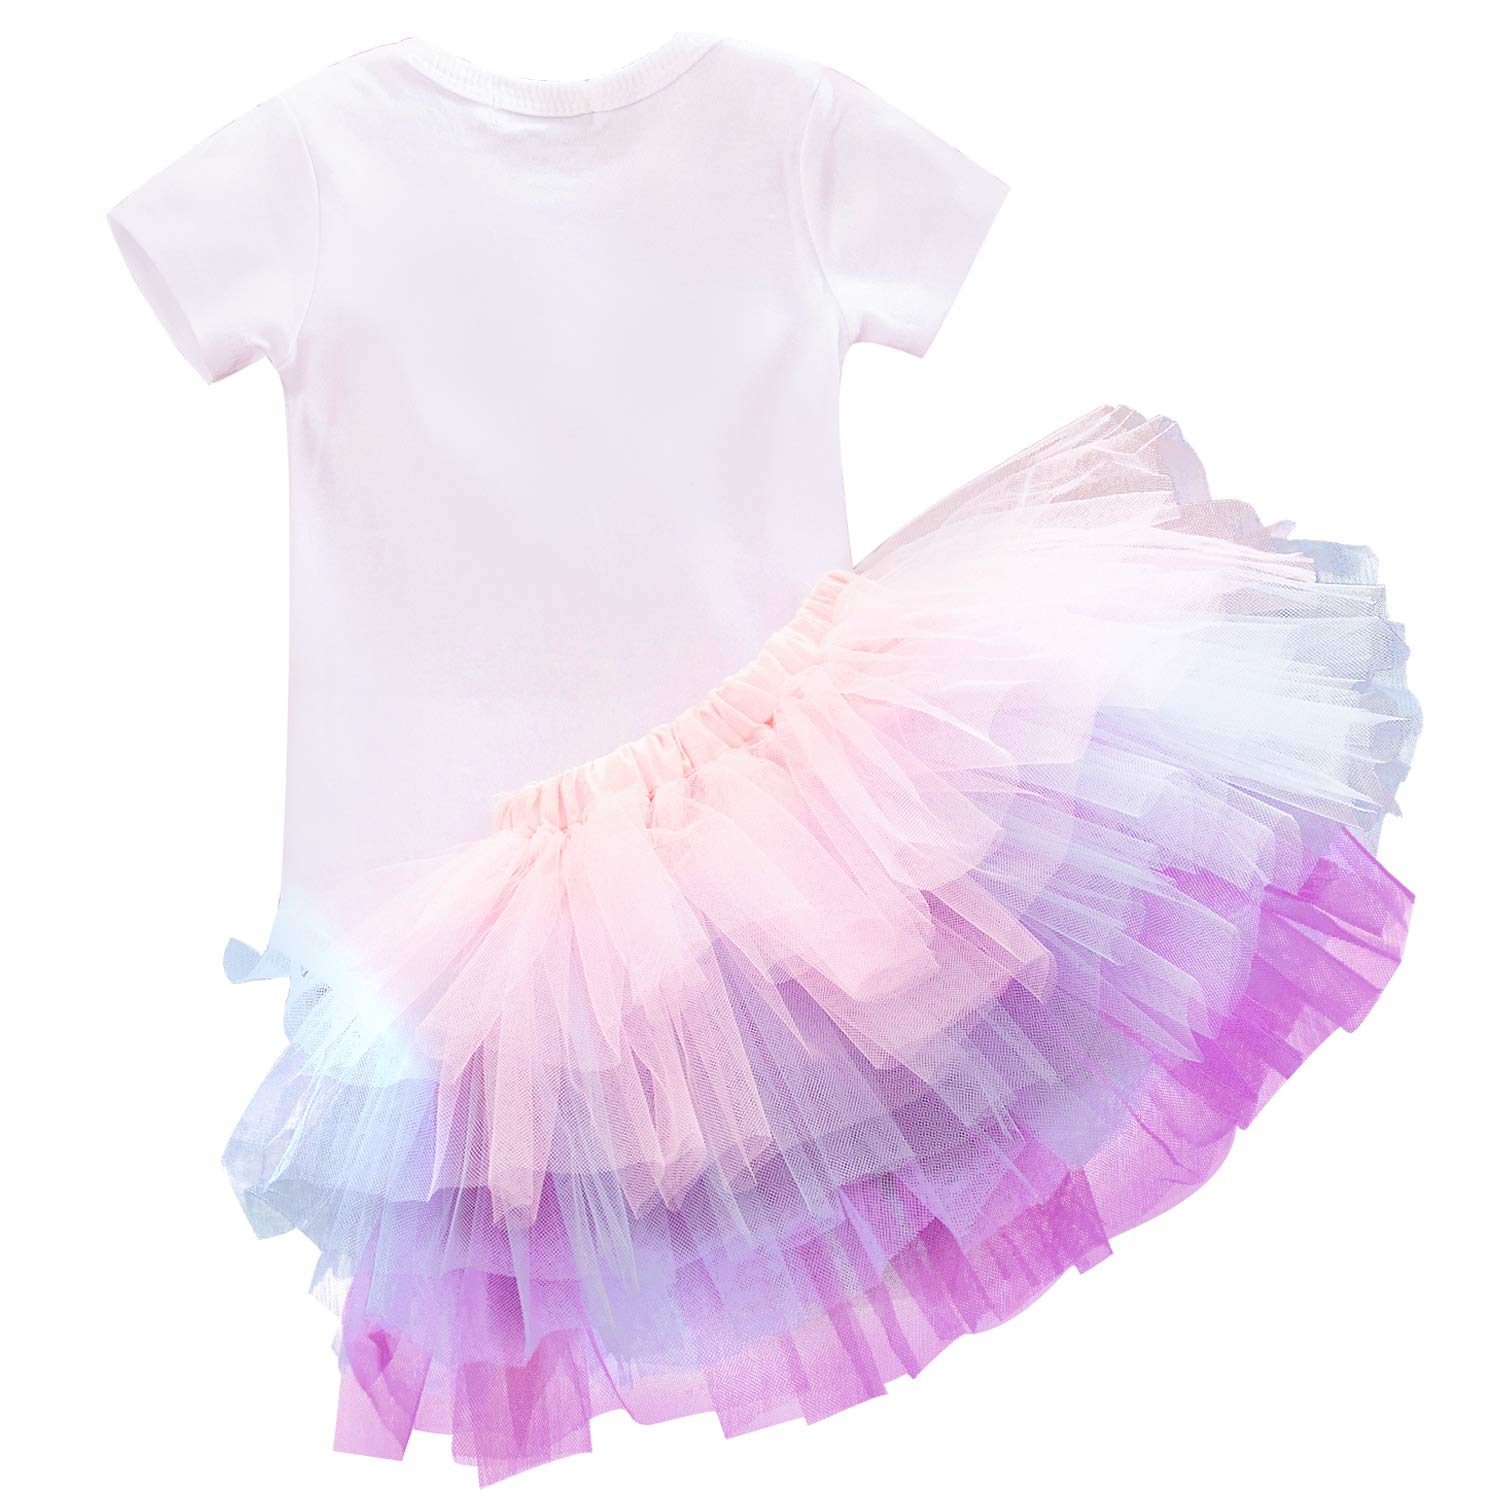 NNJXD Baby Girl Tutu Skirt Sets 1 Year Birthday Party Clothes